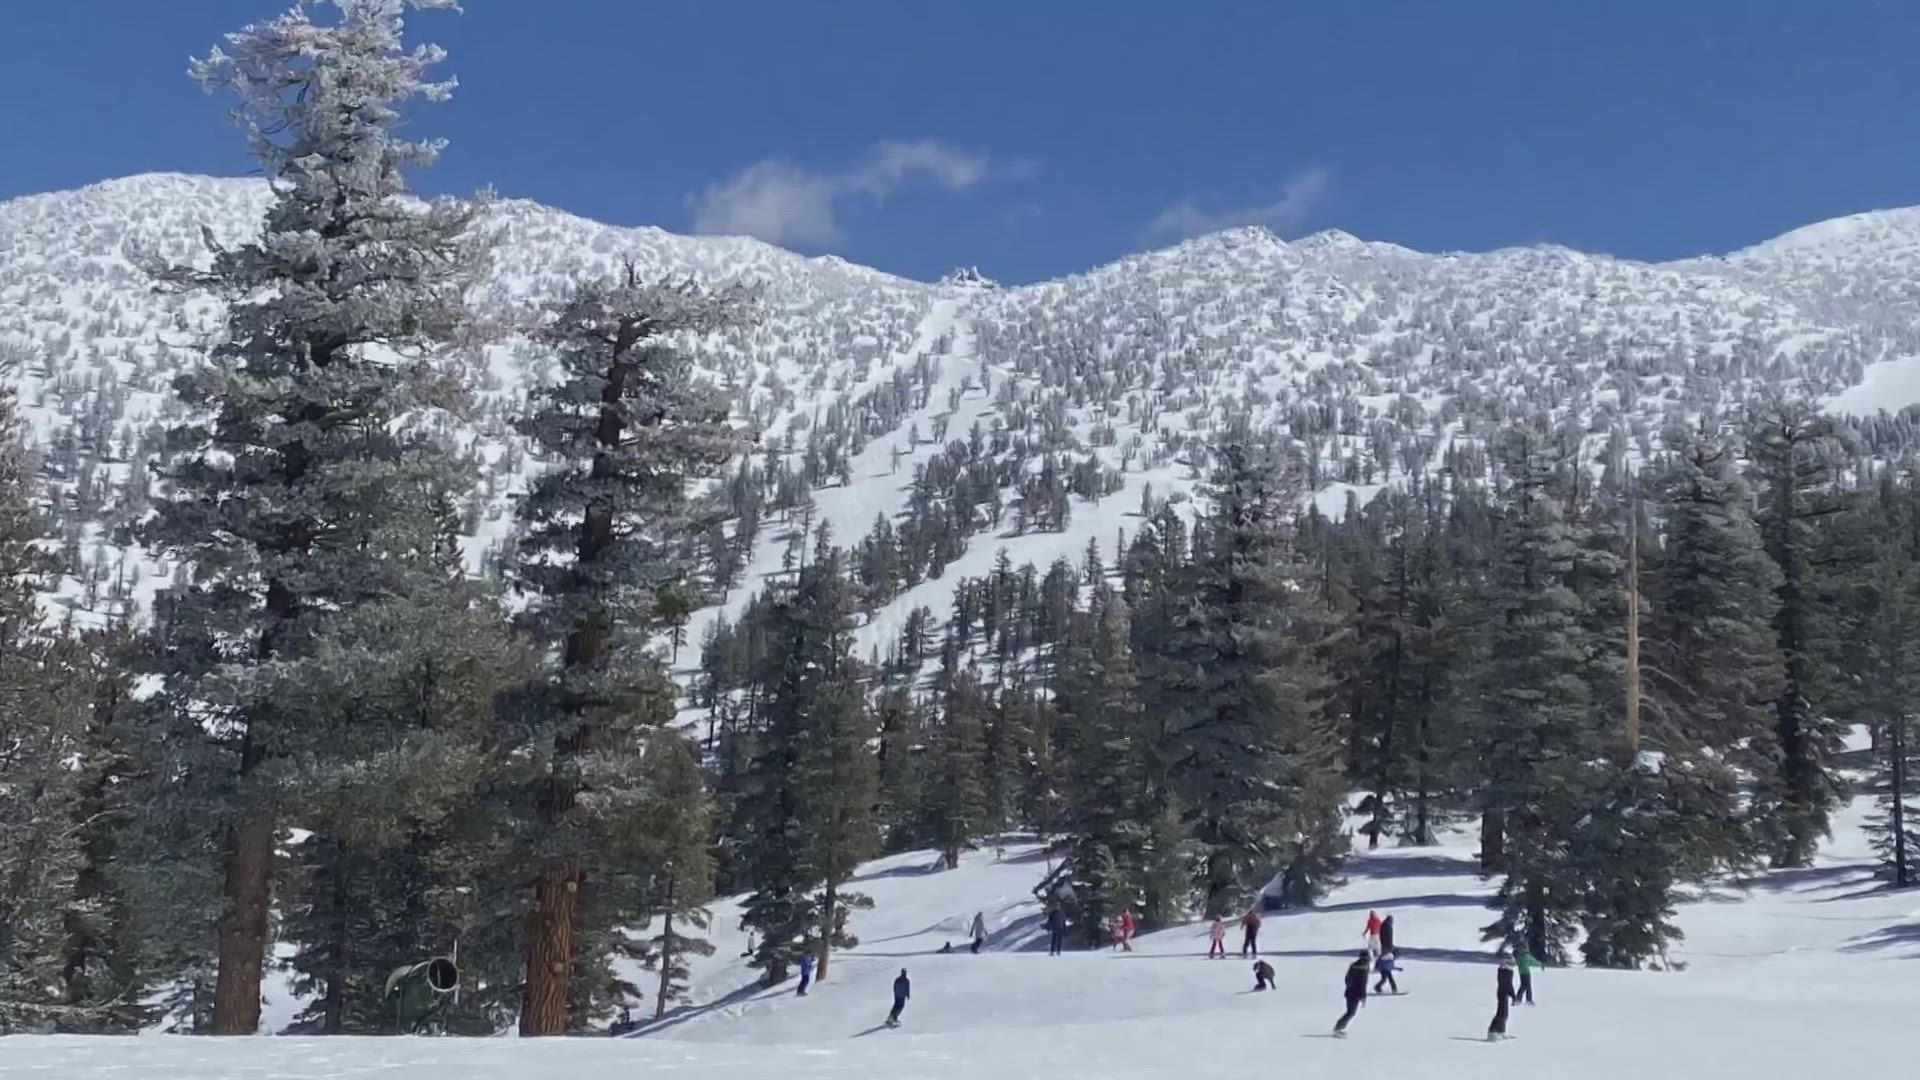 A new study released by U.C. San Diego's Scripps Institution of Oceanography shows the Sierra Nevada snowline rising 1600 feet by the end of the century.